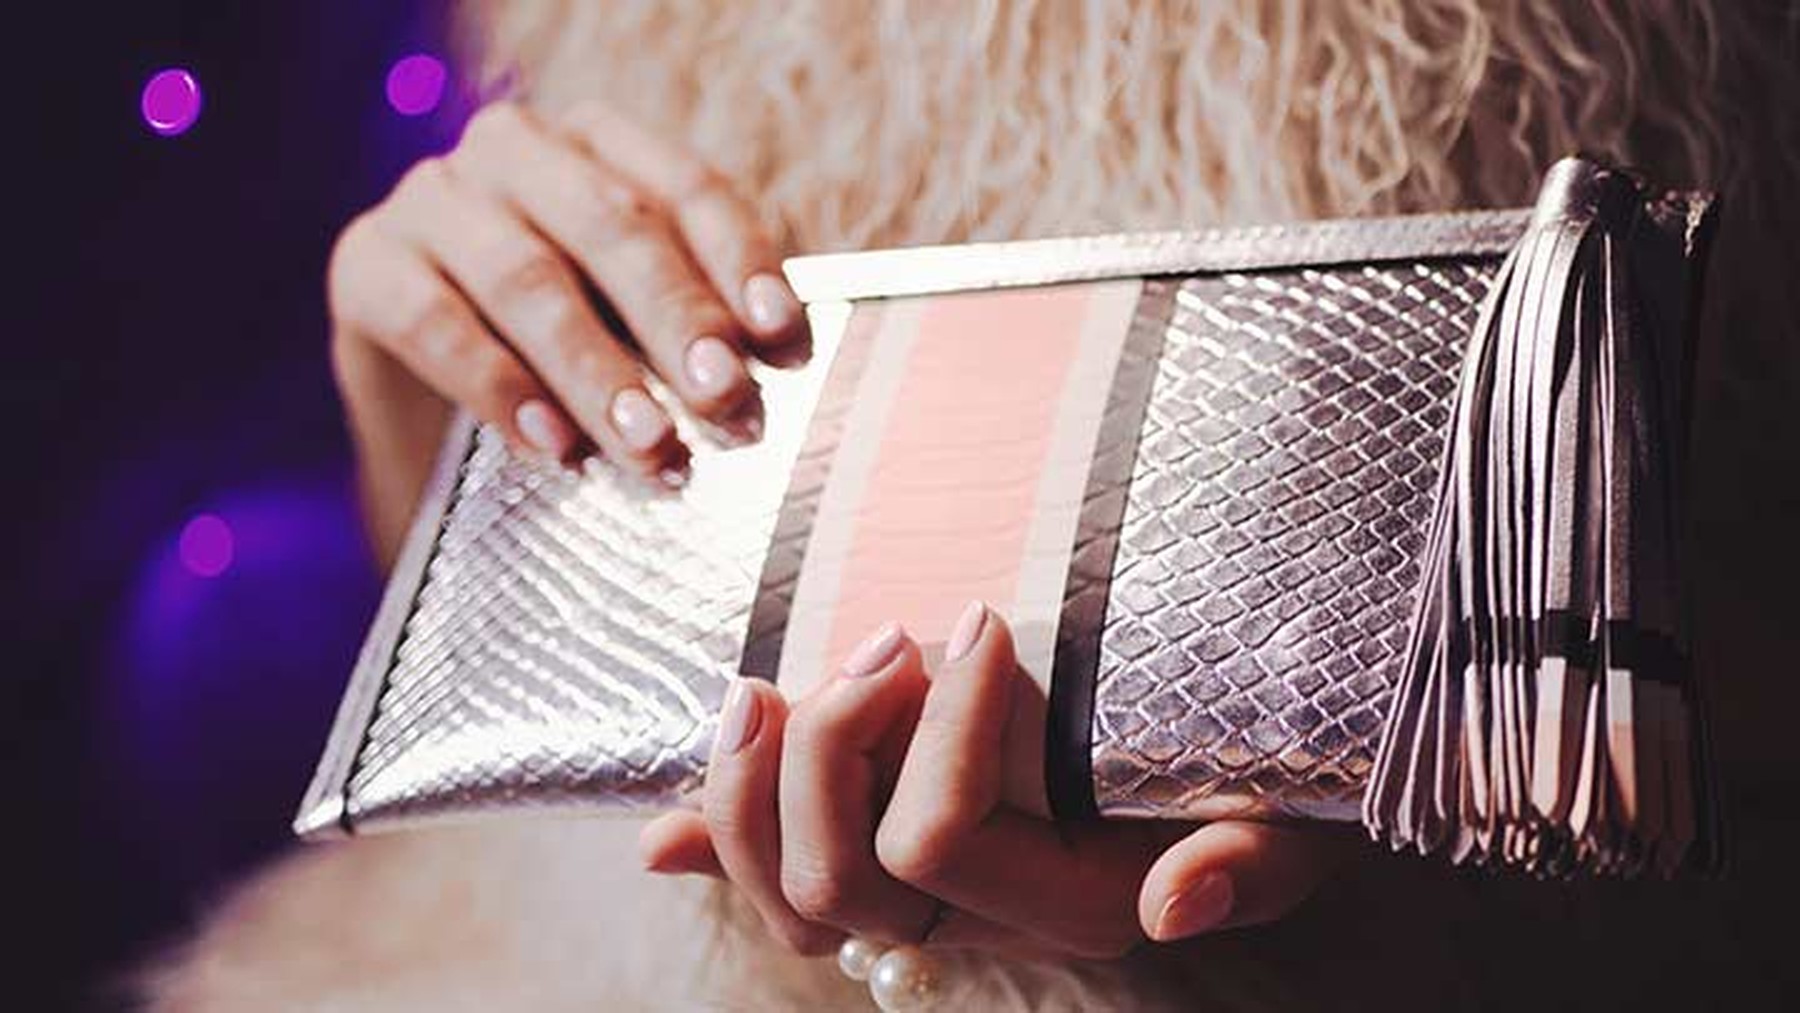 Silver clutch held by woman with manicure